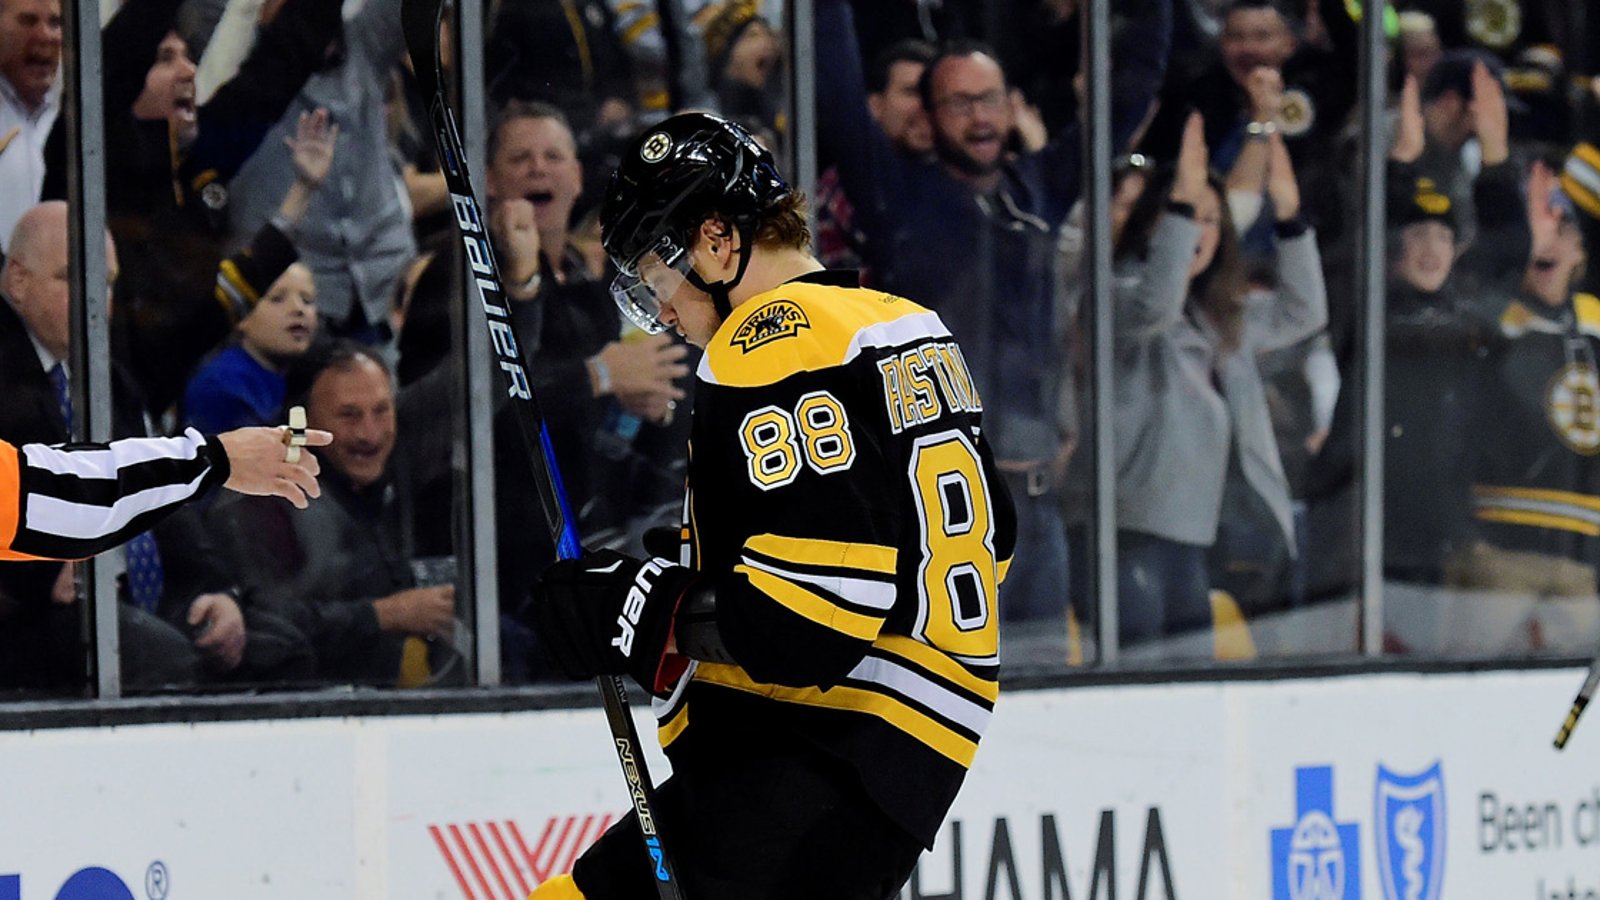 Must see: Goal of the Night - David Pastrnak